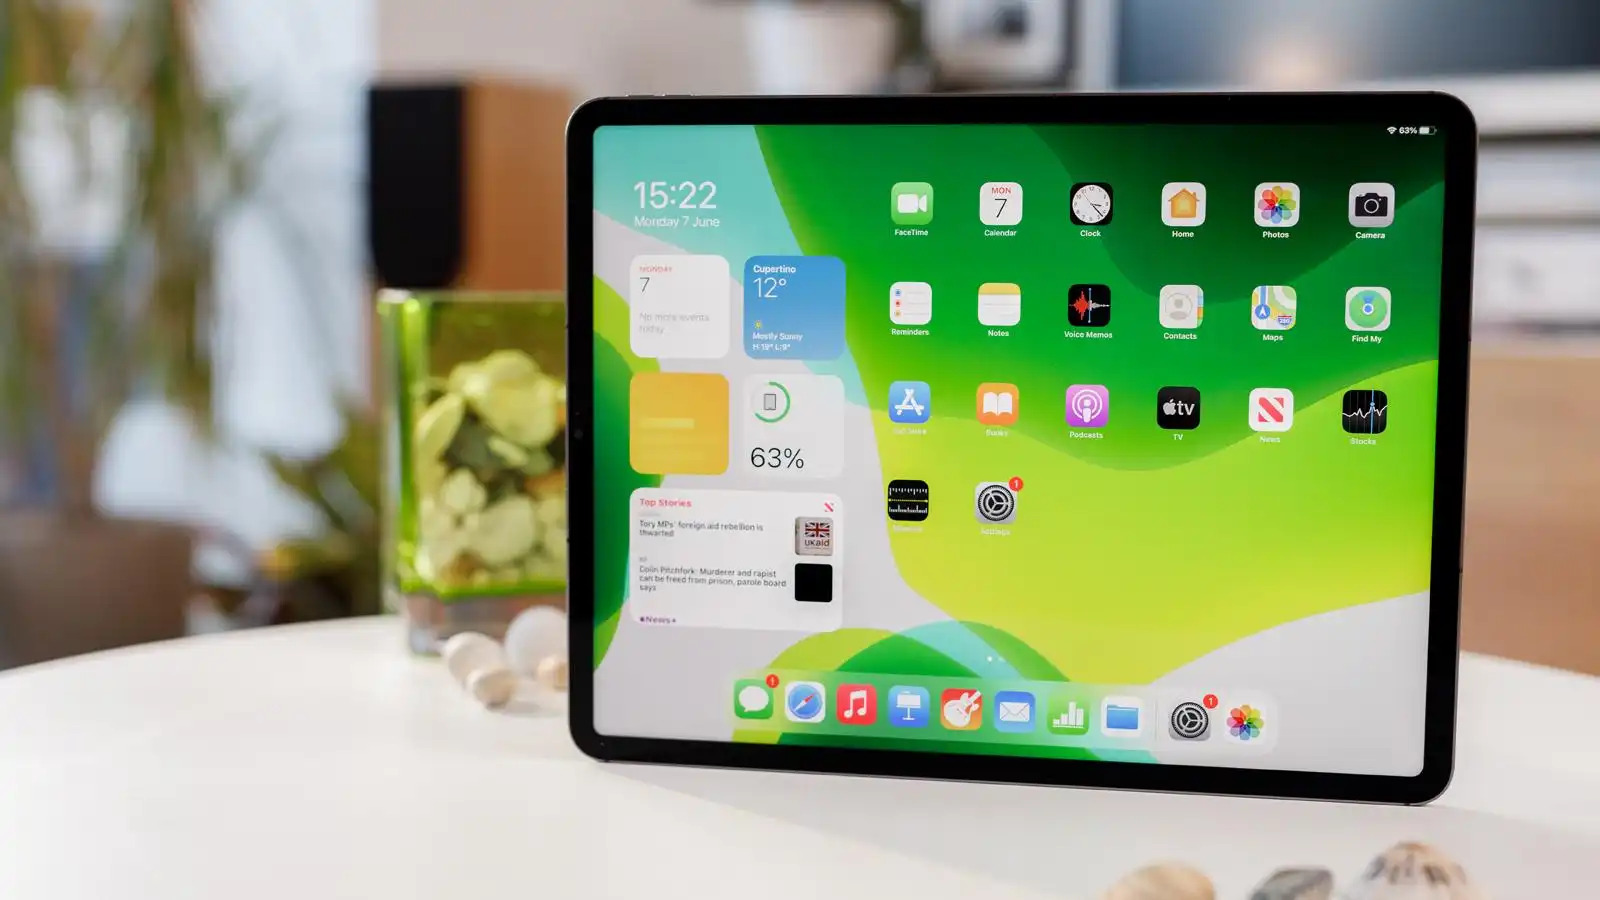 future-ipad-could-get-a-15-inch-oled-display-rumor-says